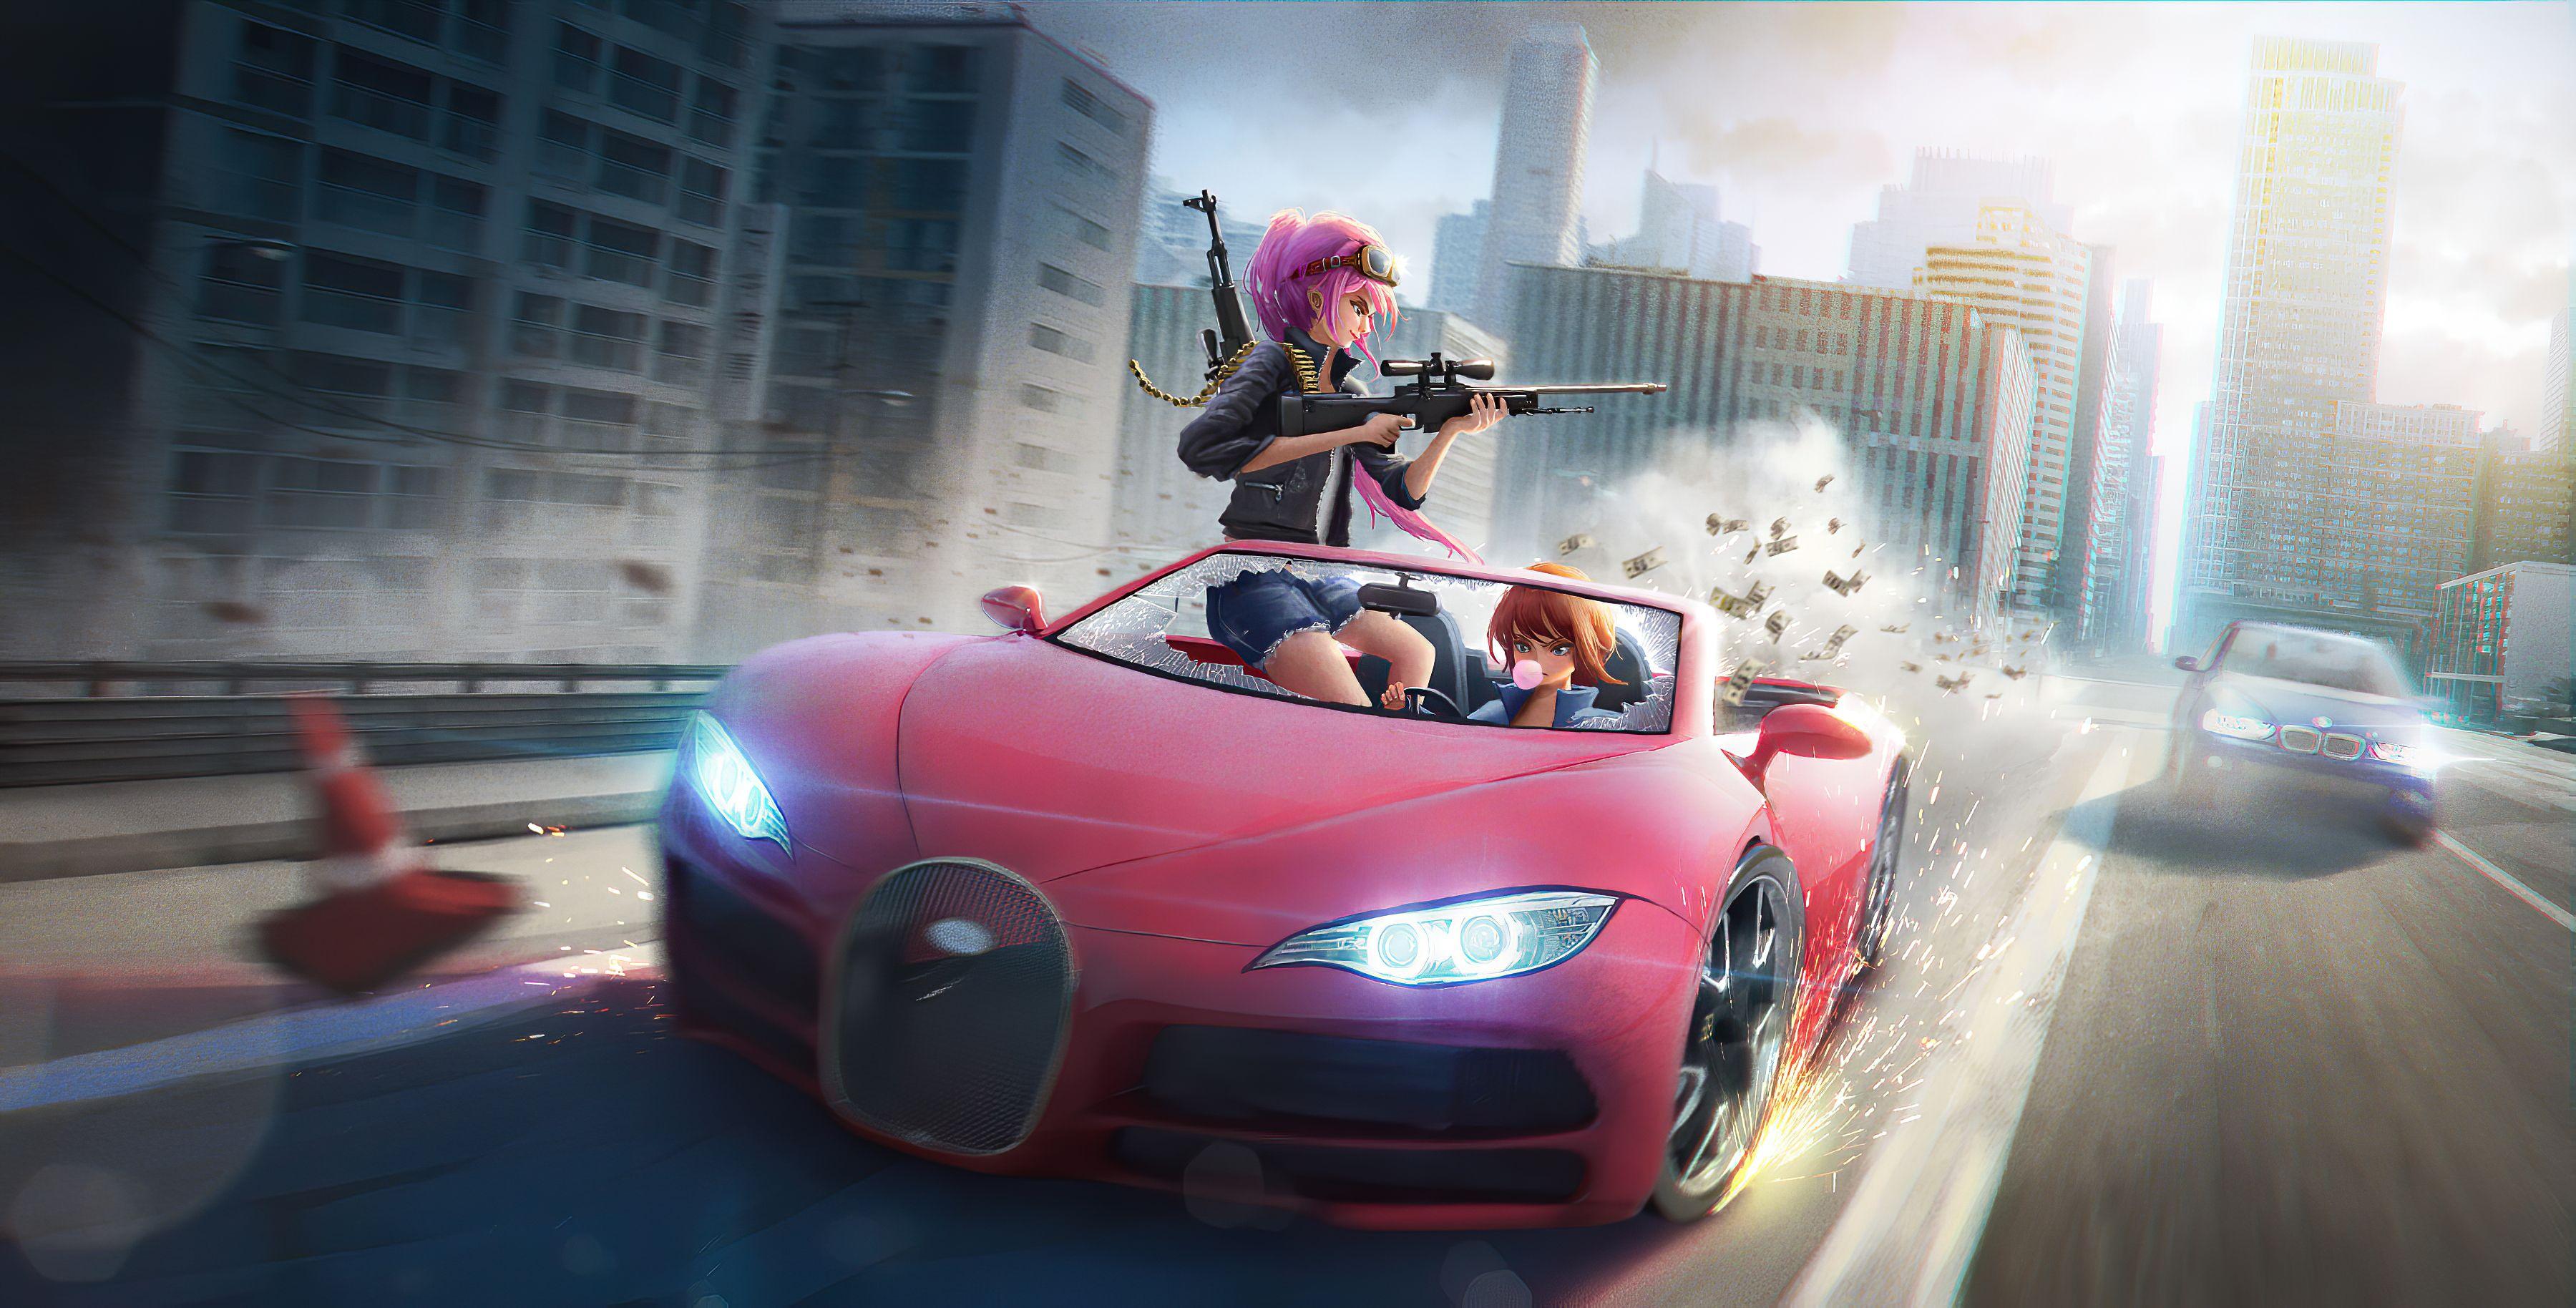 Anime Car Wallpapers and Backgrounds image Free Download